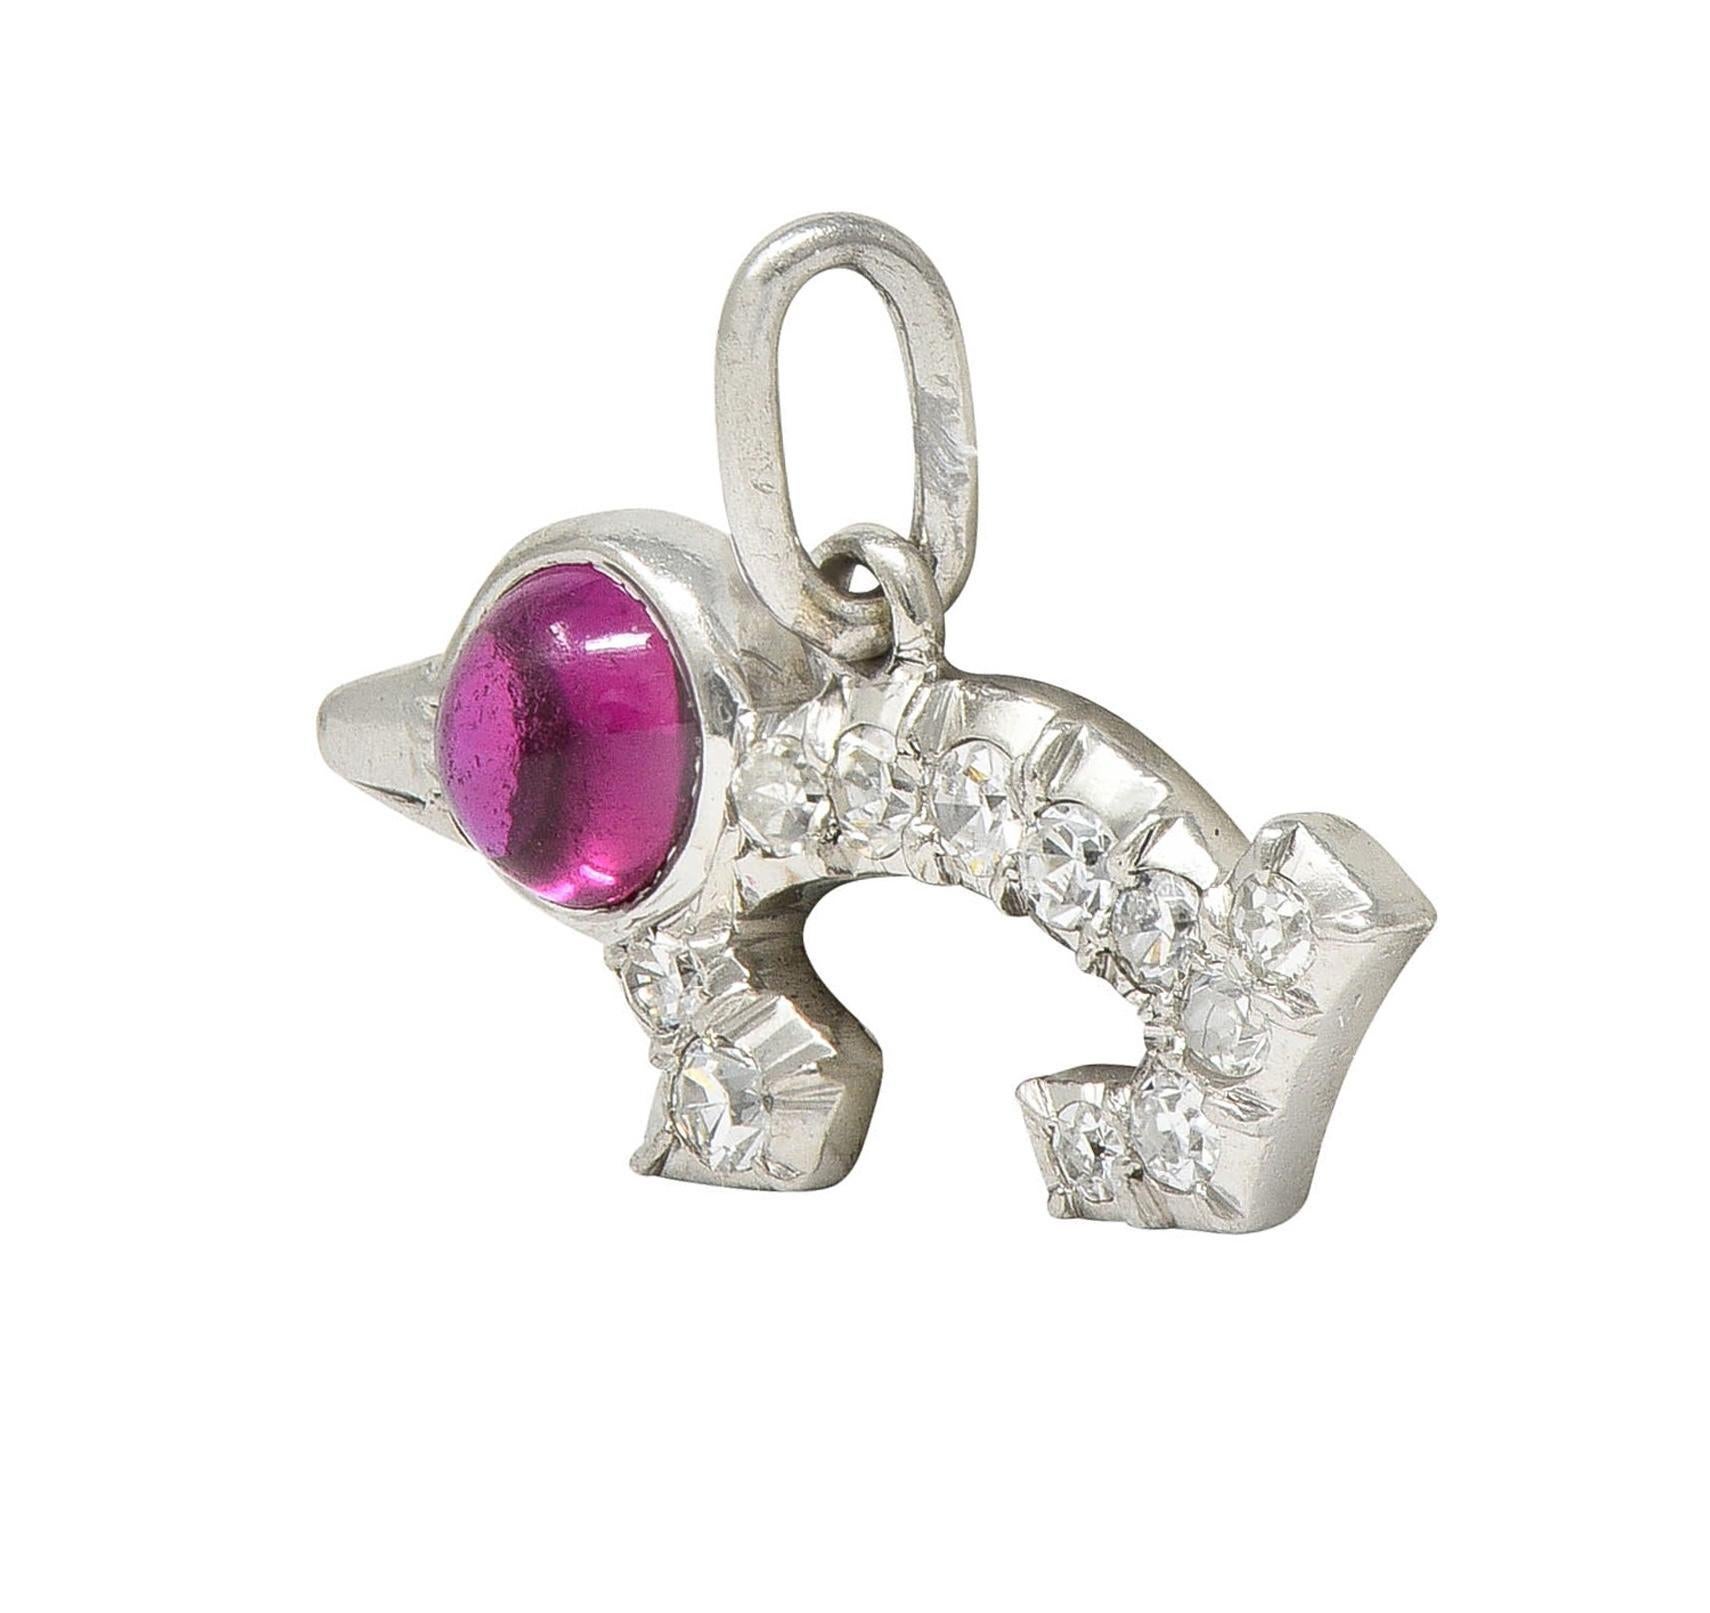 Designed as a stylized wiener dog with a round shaped ruby cabochon head
Weighing approximately 0.35 carat total - transparent medium red in color
Bezel set with single cut diamonds bead set on body
Weighing approximately 0.15 carat total 
Eye clean